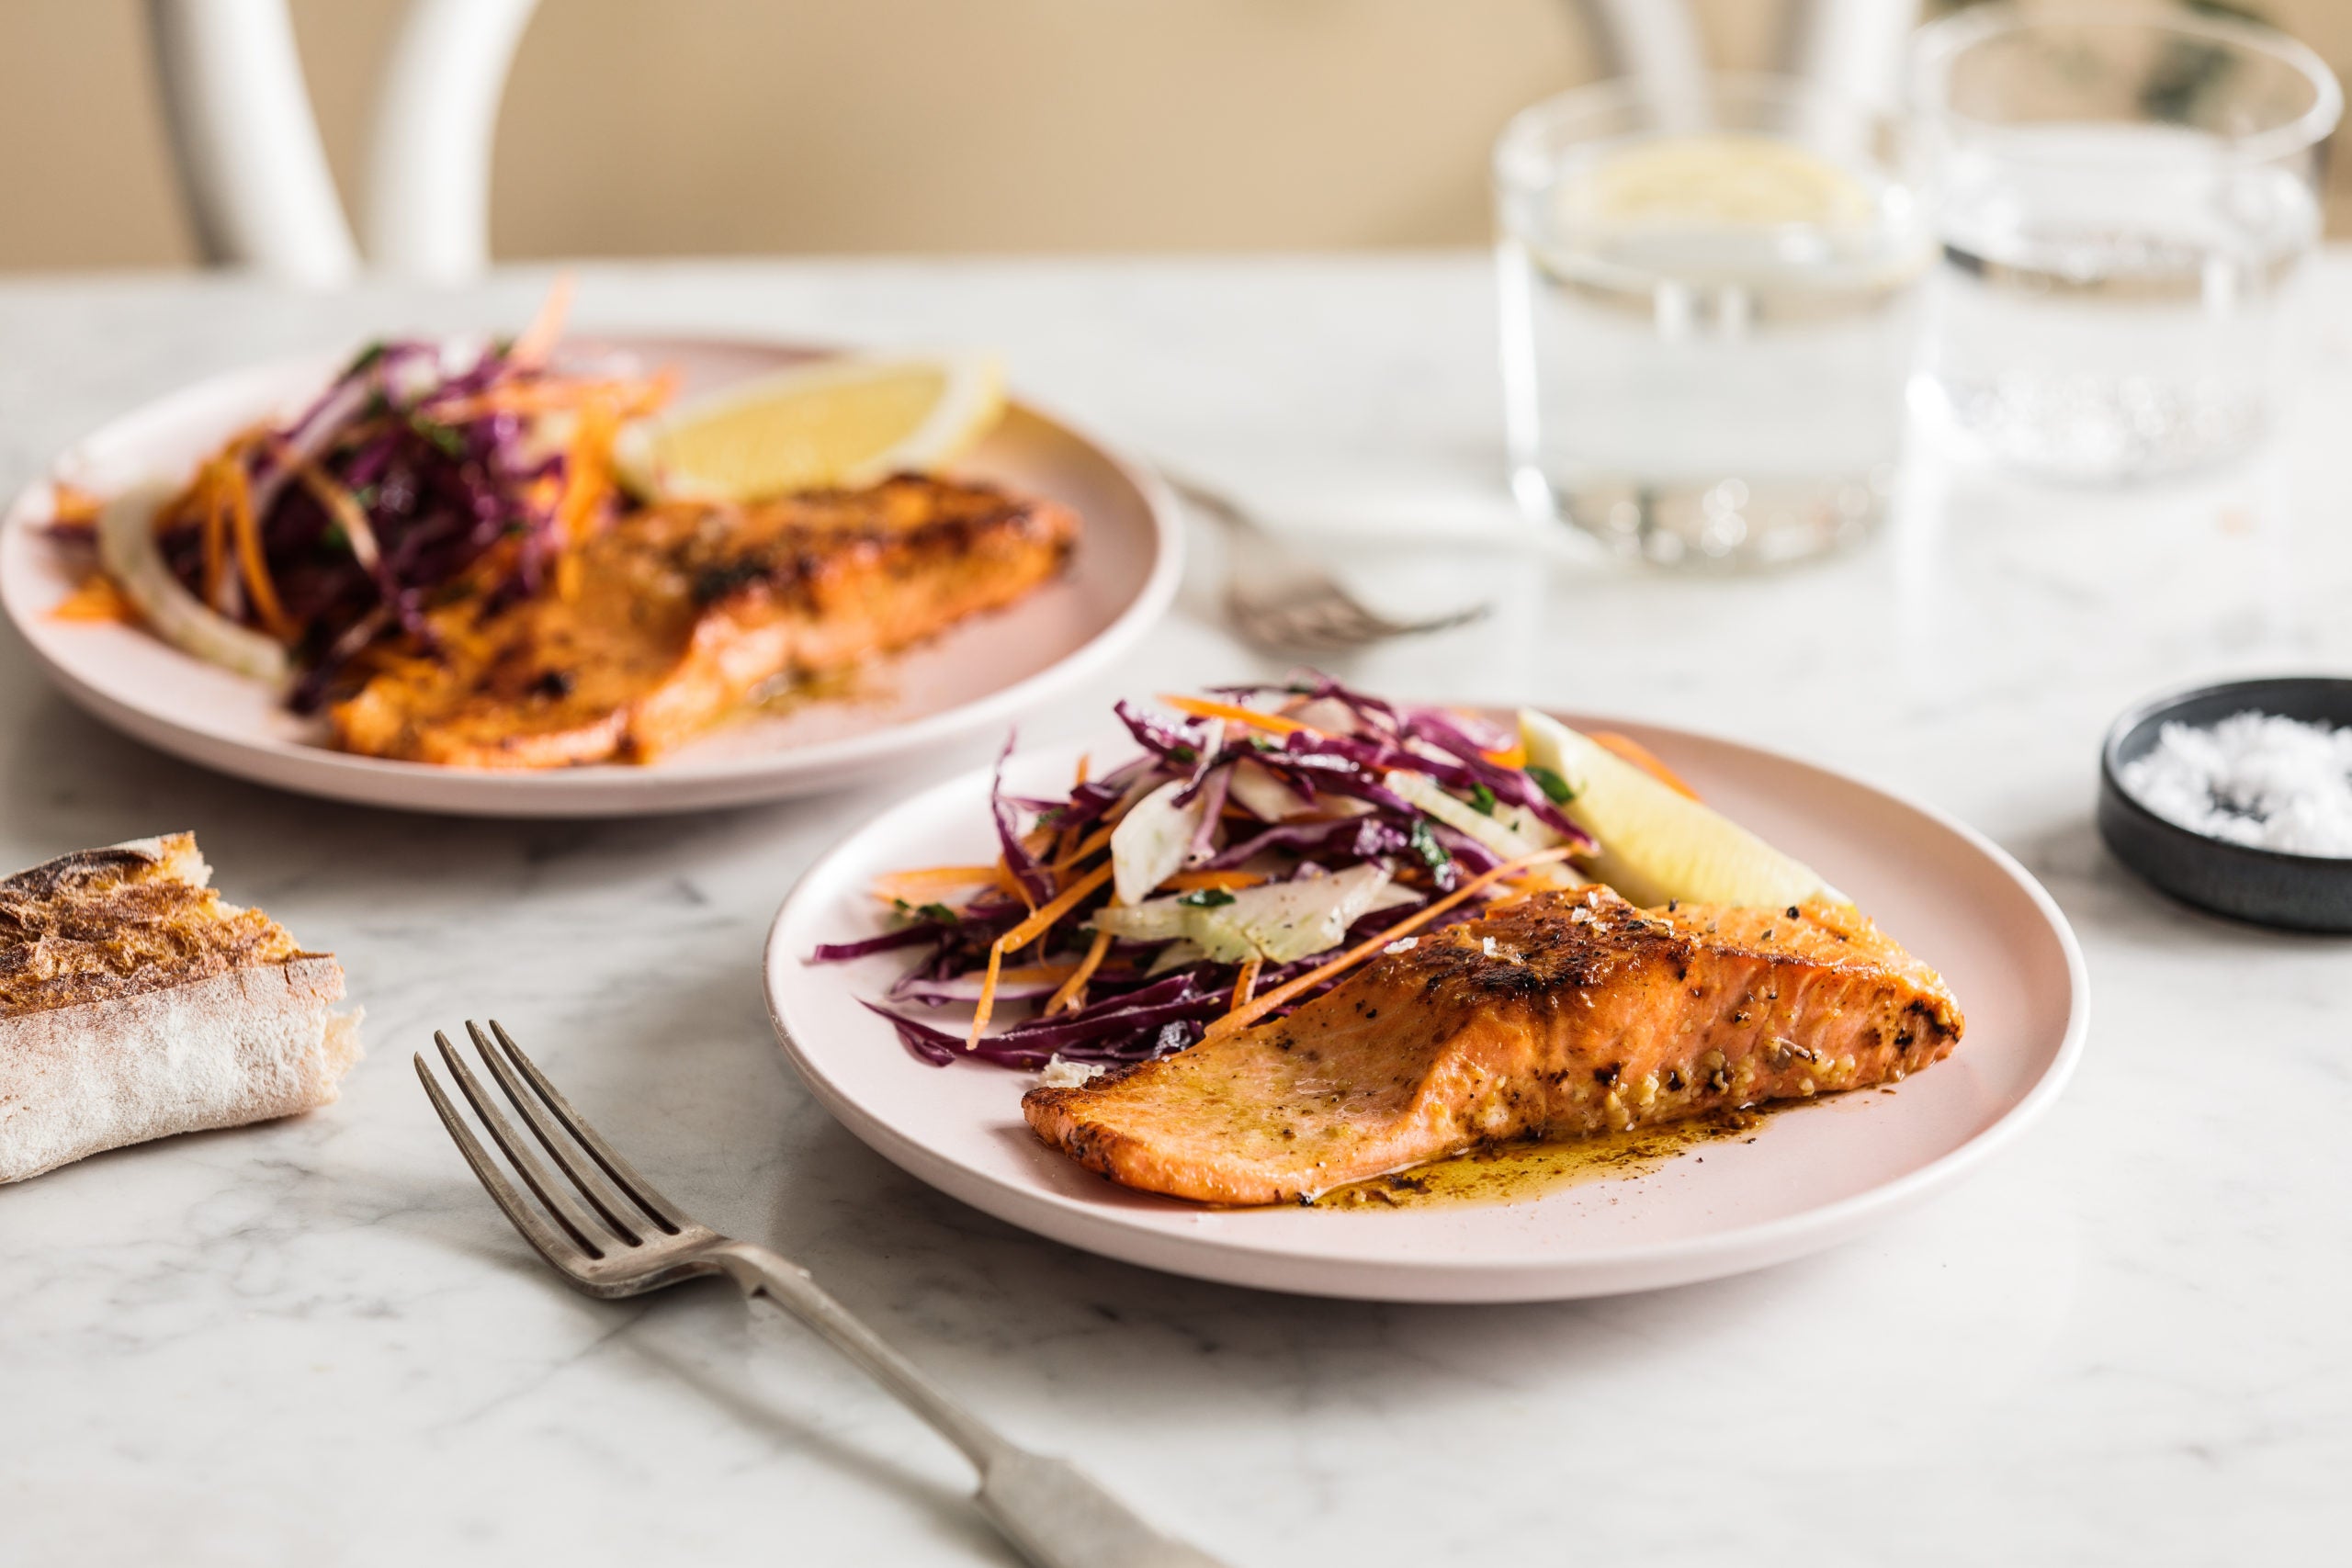 Pan fried Ocean Trout with Hot Lemon Butter and Winter Slaw